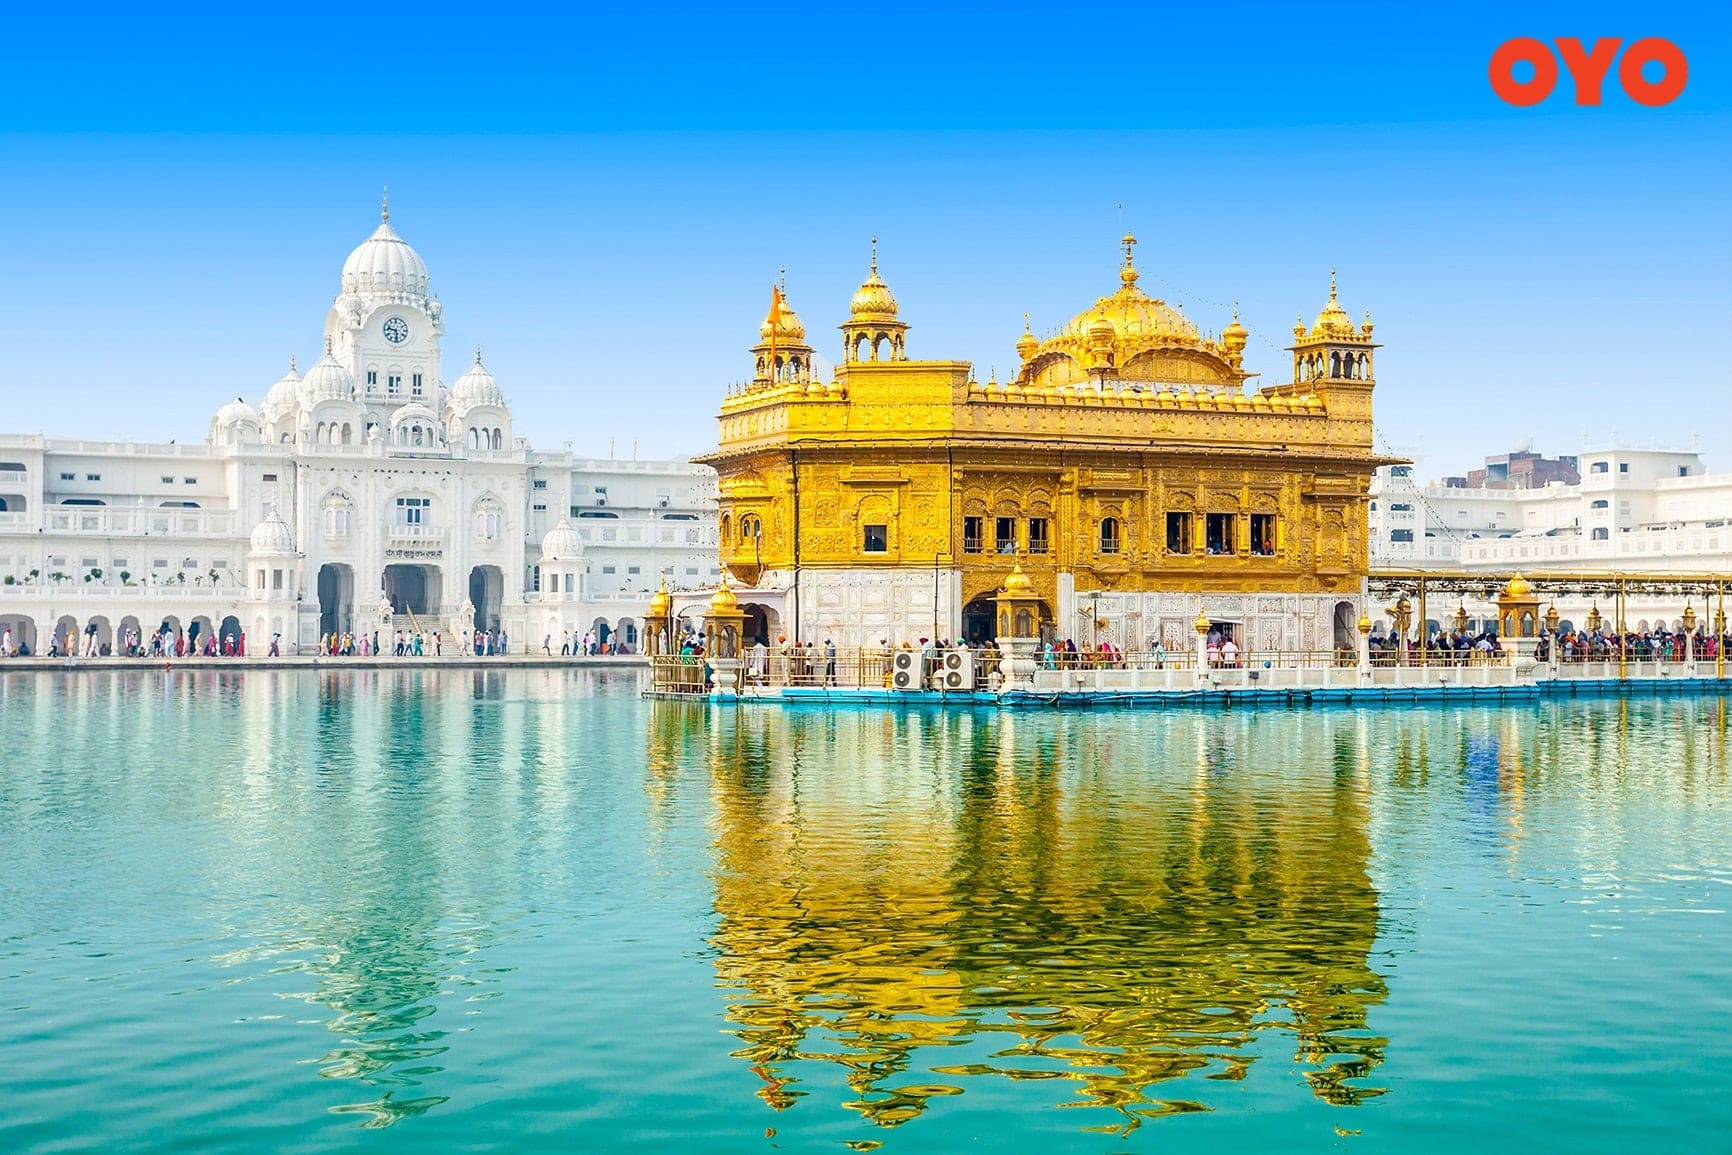 The Golden Temple, Amritsar- One of the most famous temple of India